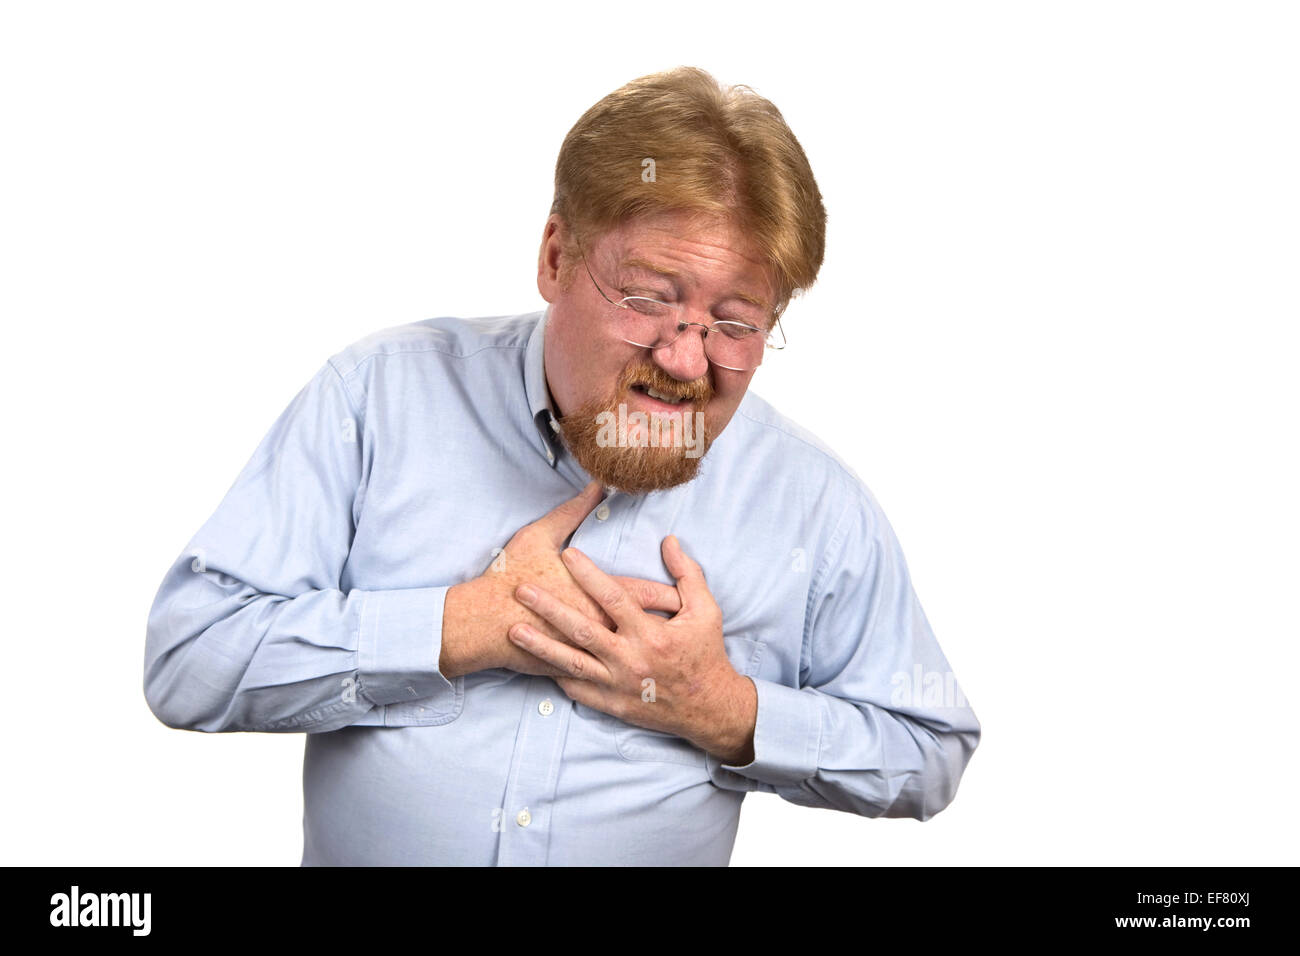 Mature man in his mid fifties clutches his chest as he reacts to heart attack pains. Stock Photo